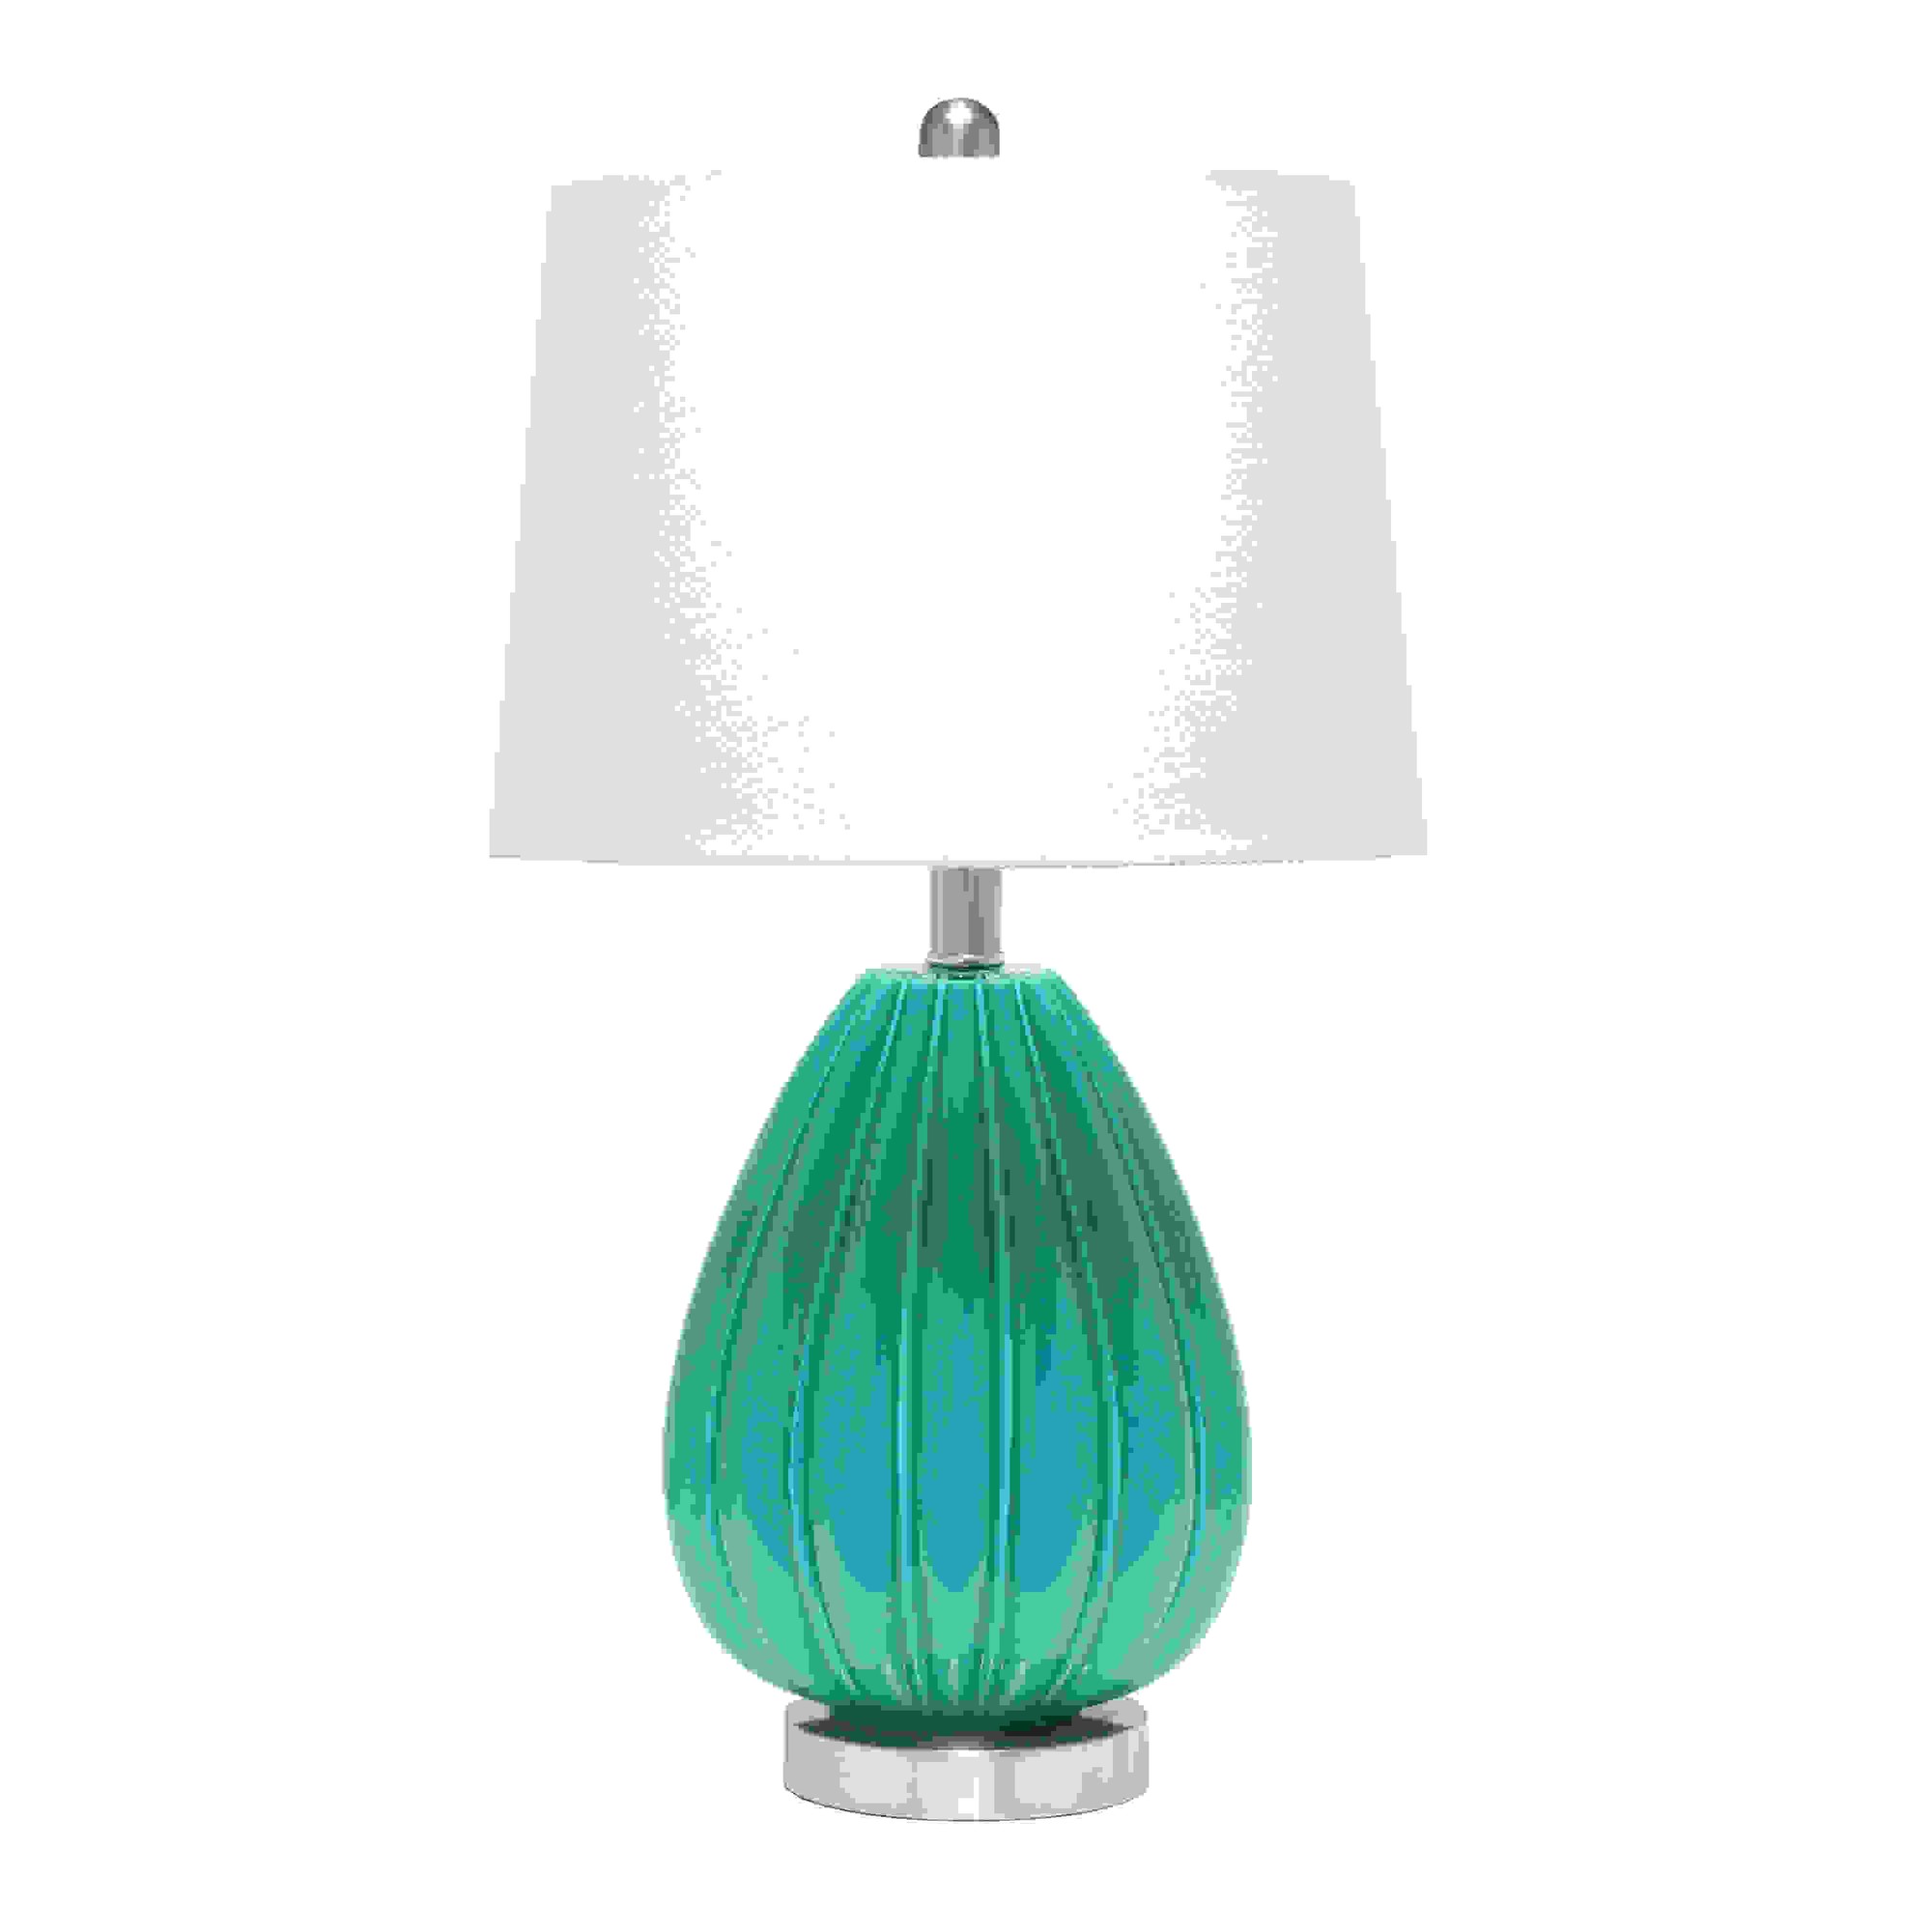  Lalia Home Pleated Table Lamp with White Fabric Shade, Teal